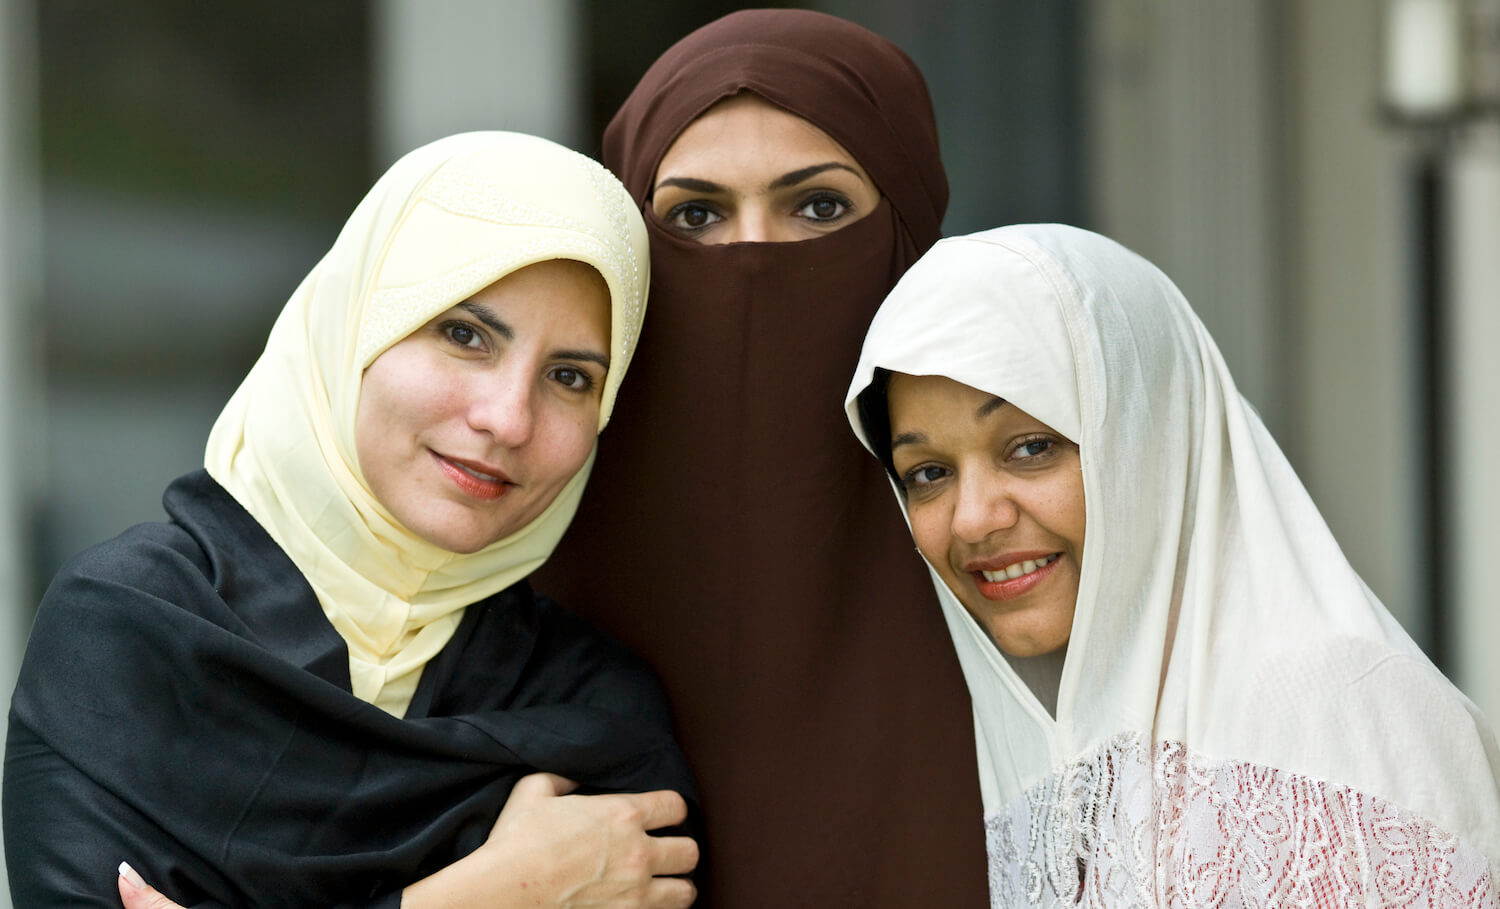 two women wearing hijabs smile next to one woman wearing a burqa